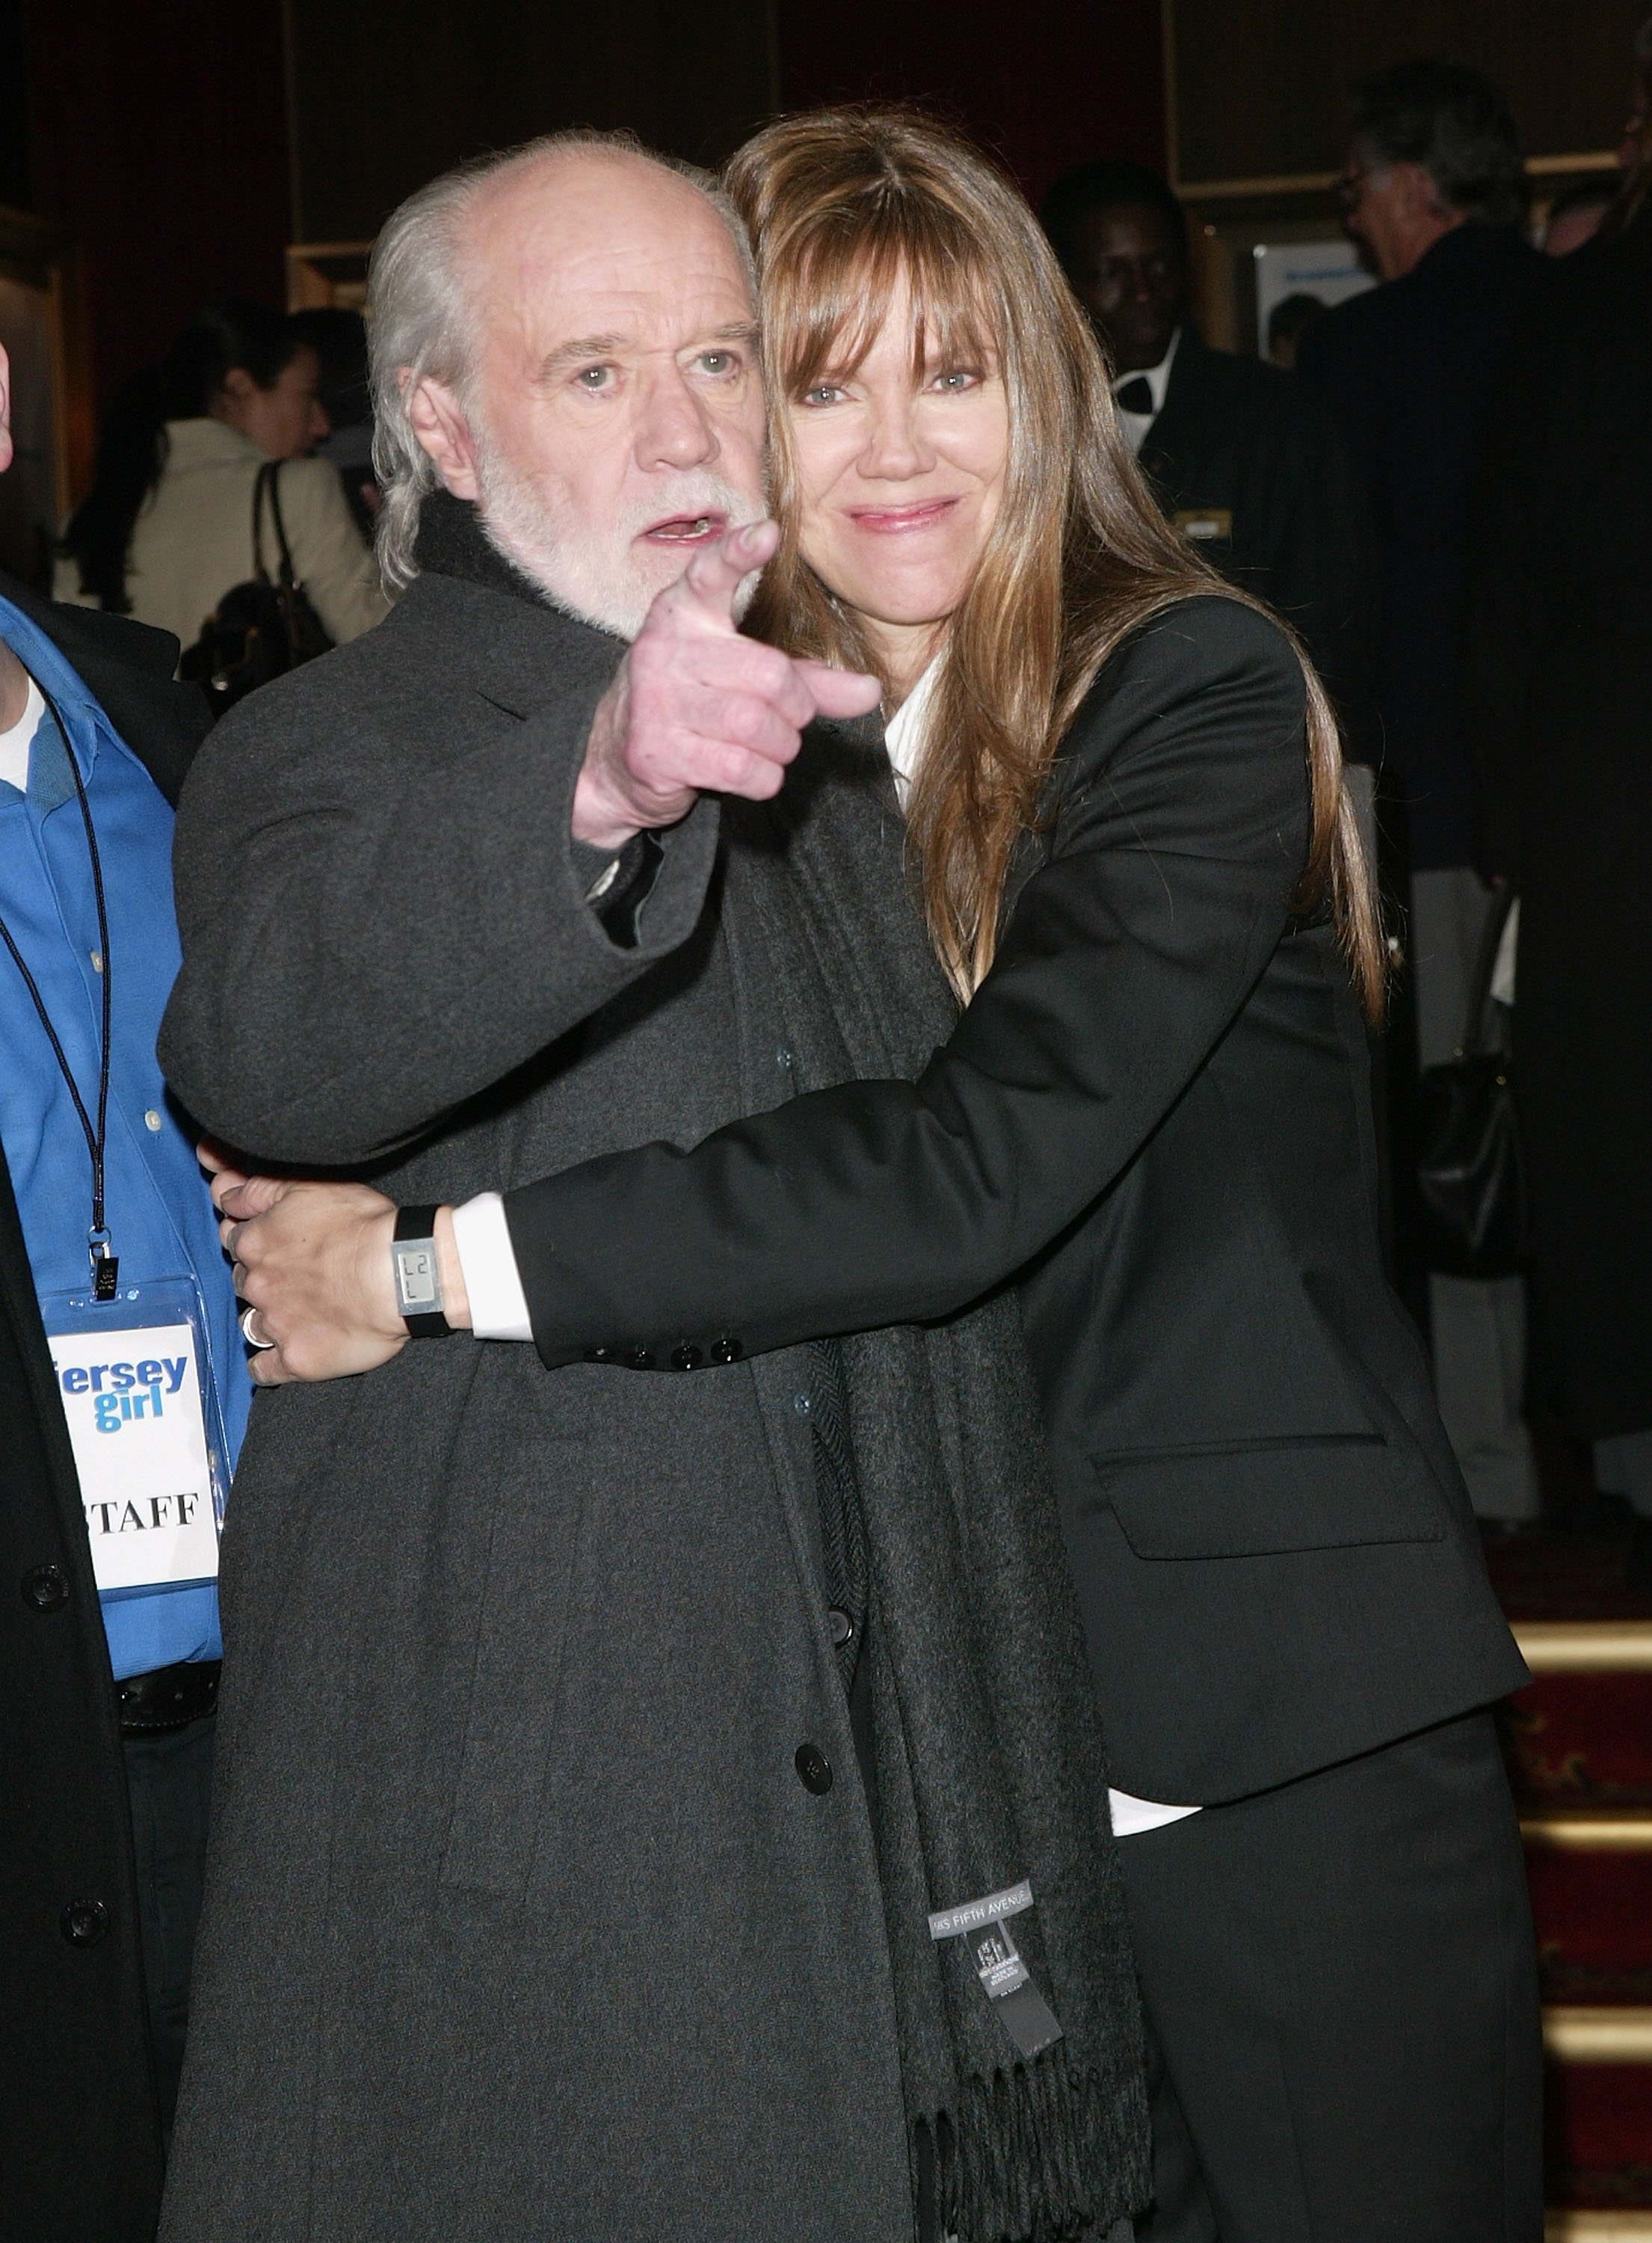 Comedian George Carlin and wife Sally Wade attend the "Jersey Girl" film premiere on March 9, 2004 at the Ziegfeld Theater, in New York City. | Source: Getty Images